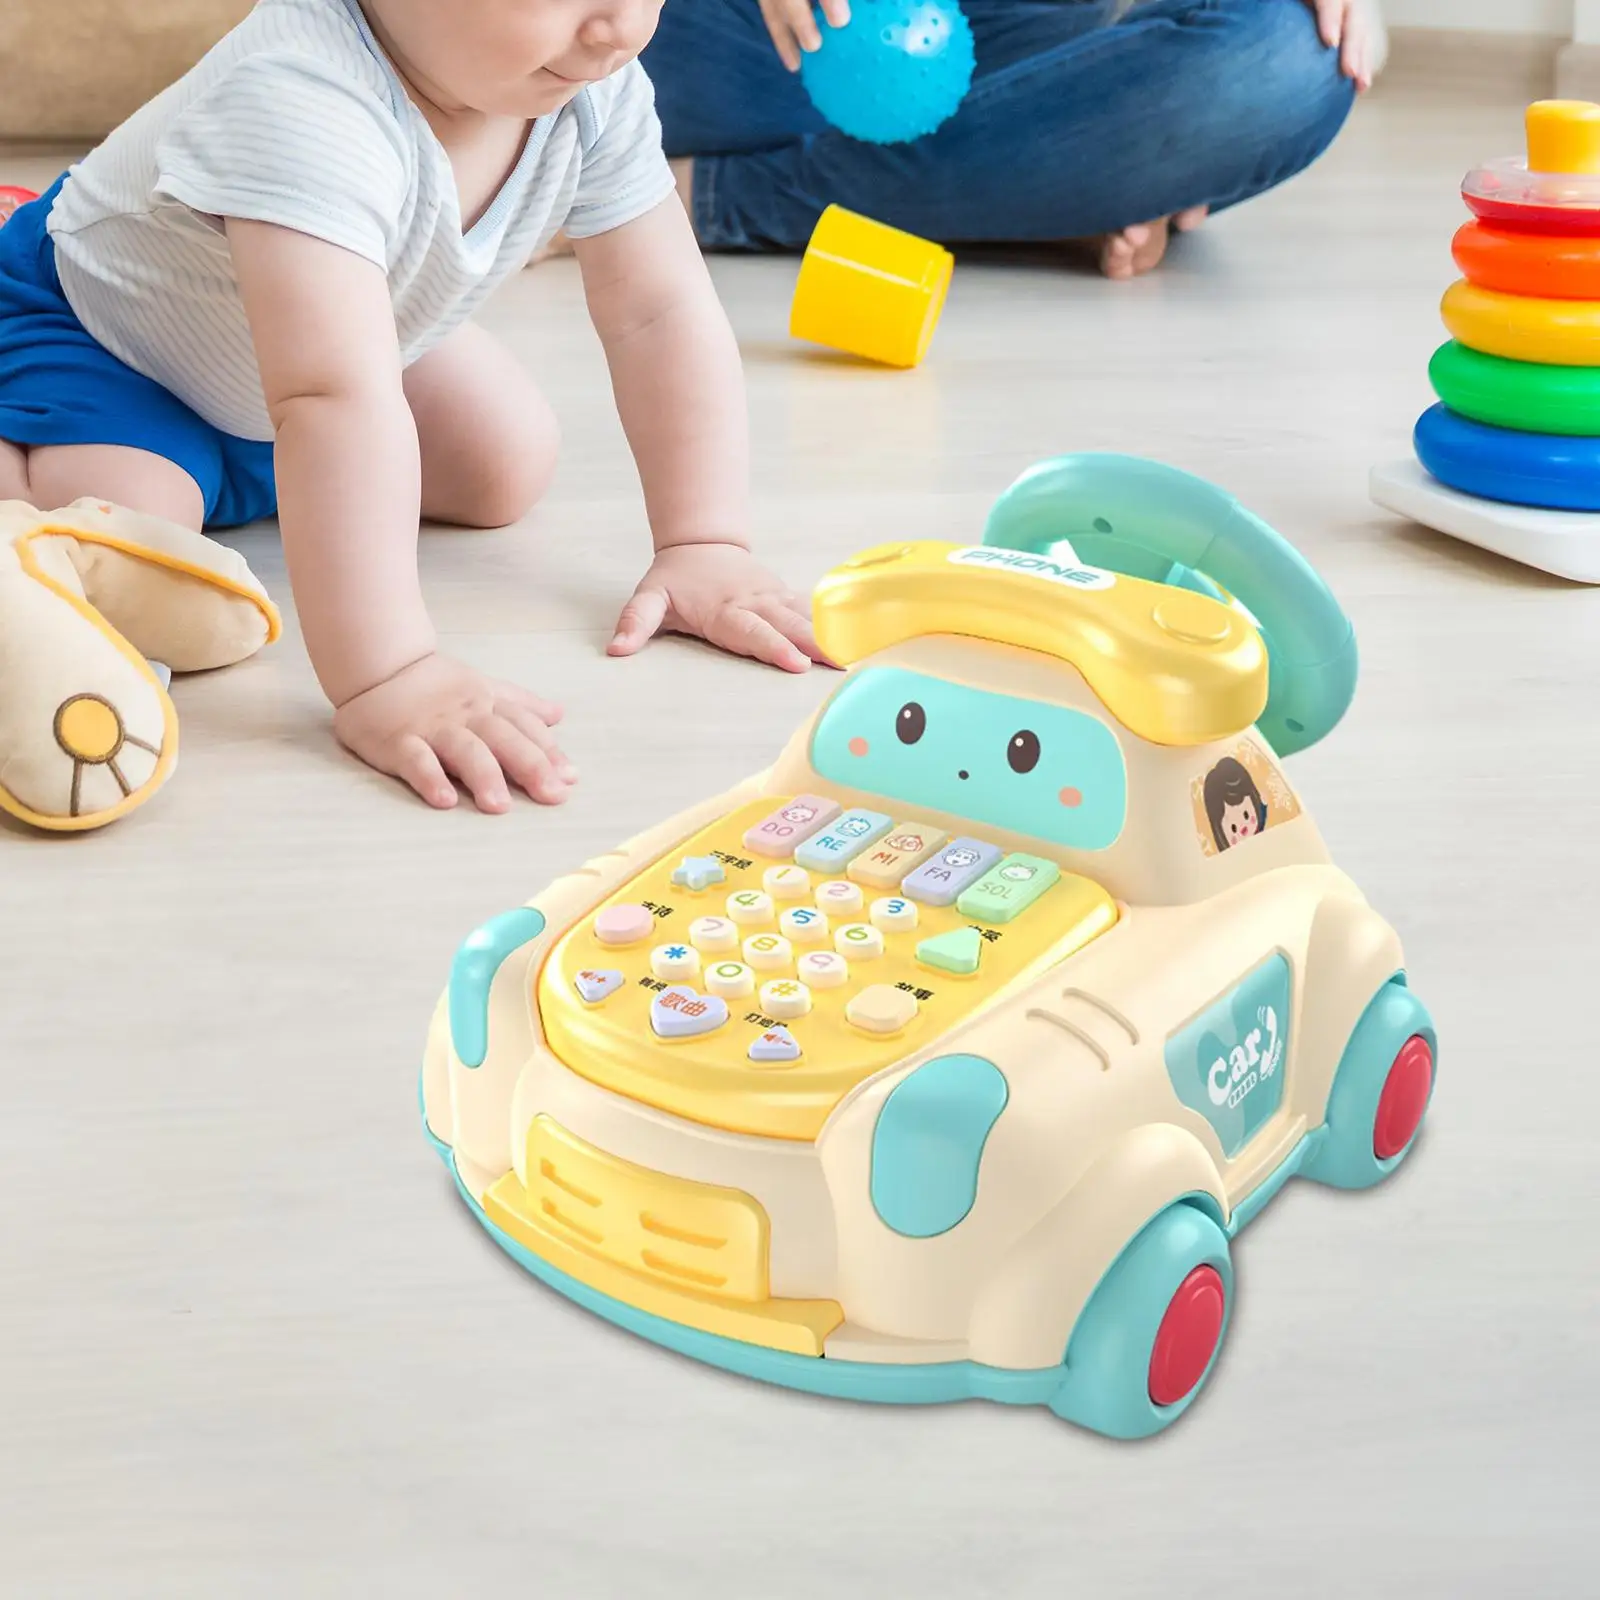 Children Phone Toy toddlers Steering Wheel Car for Game Interaction Learning